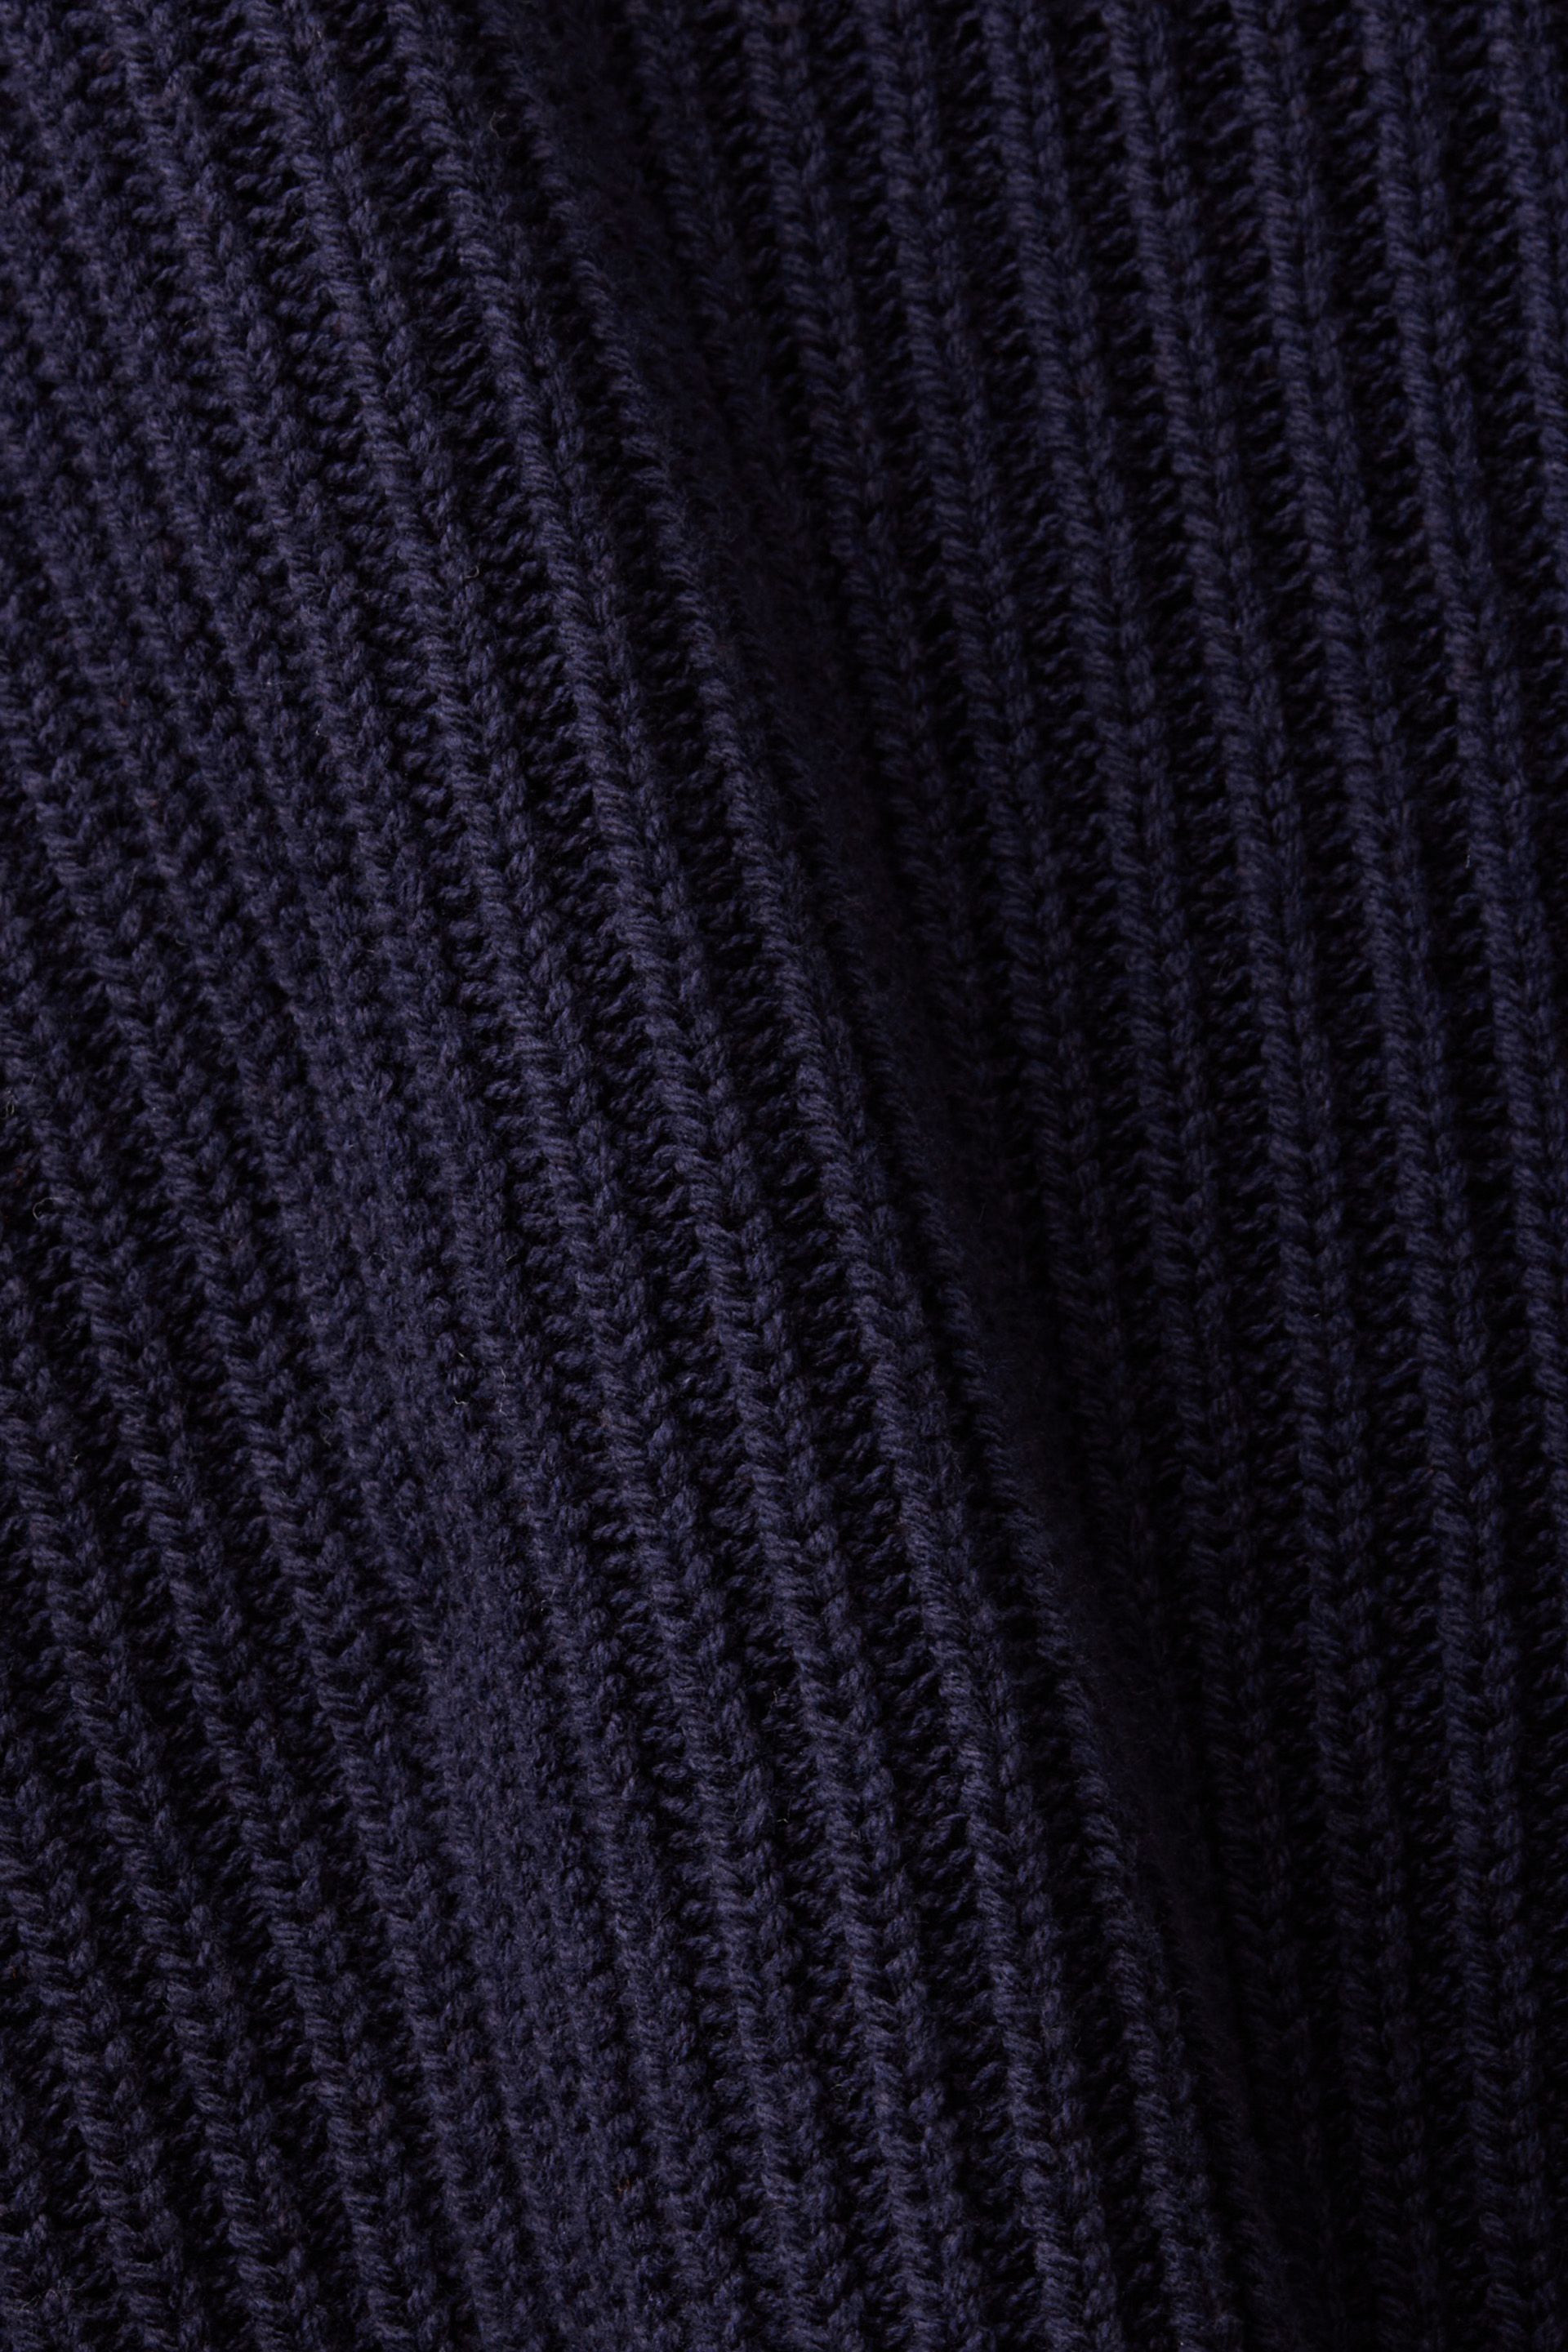 Esprit - Chunky knit pullover in cotton blend, Dark Blue, large image number 3